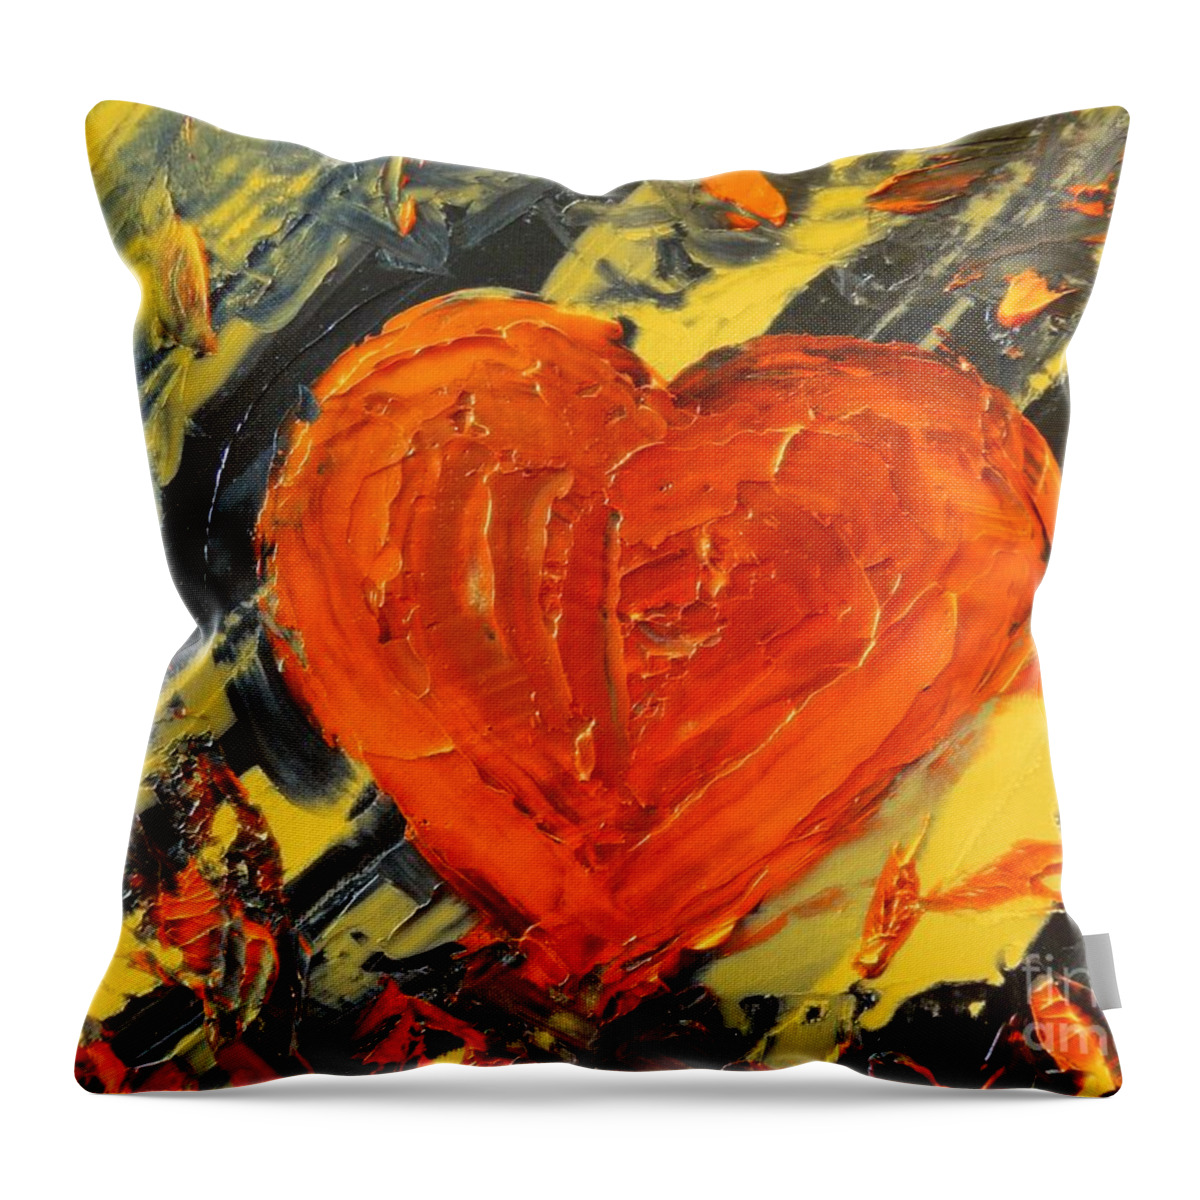 Pittsburgh Throw Pillow featuring the painting Pittsburgh Heart by Bill King